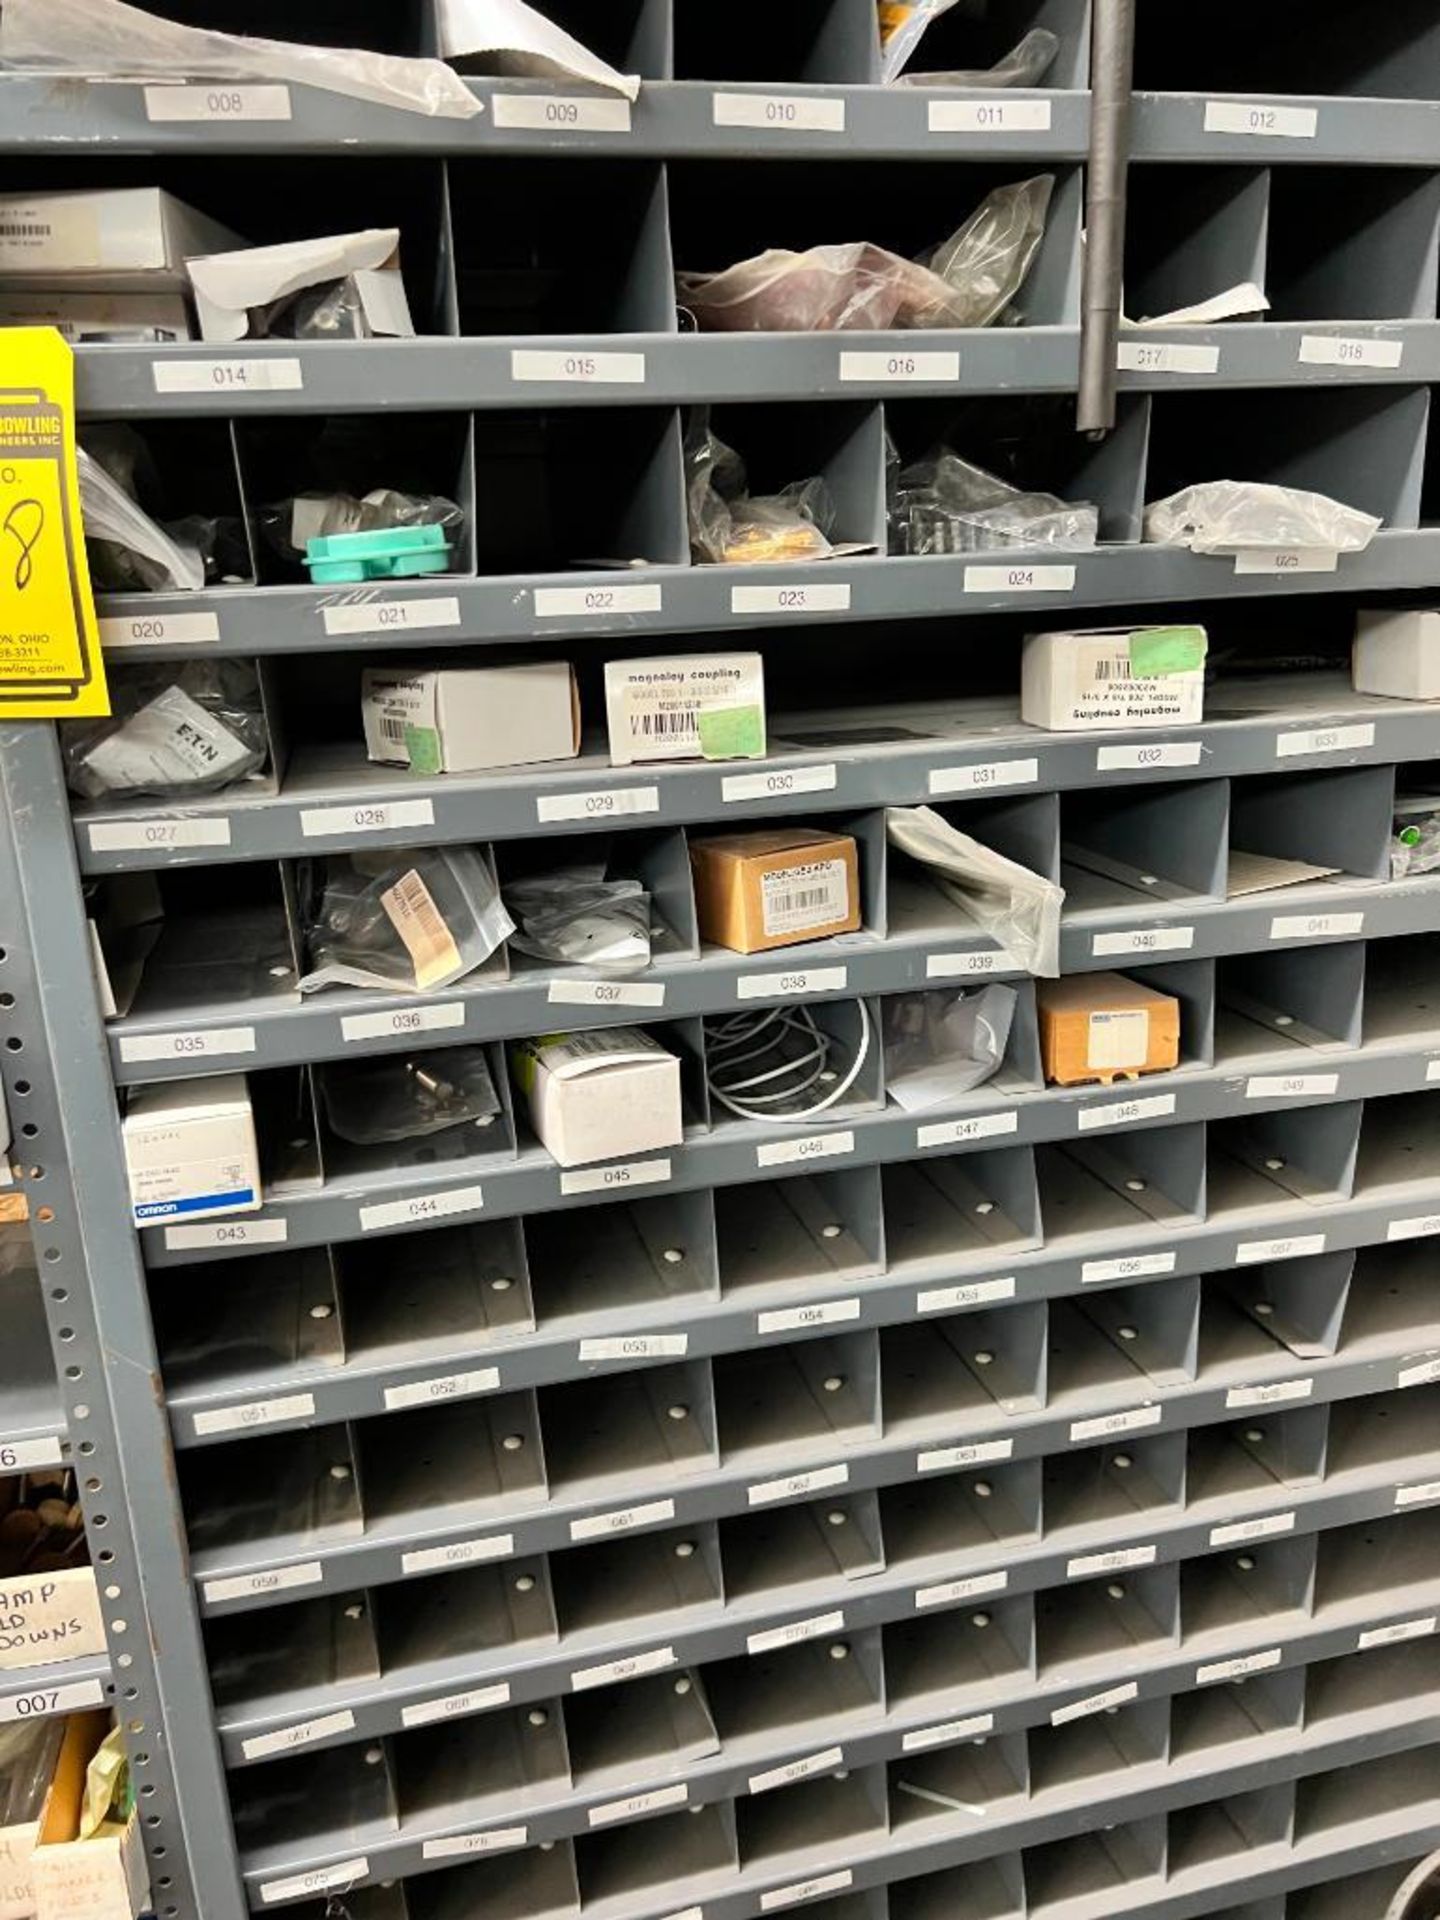 (28) Shelves of Assorted Parts, VERY LARGE LOT Consisting of MRO, Drives, Valves, PLC, Nuts, Bolts, - Image 22 of 67